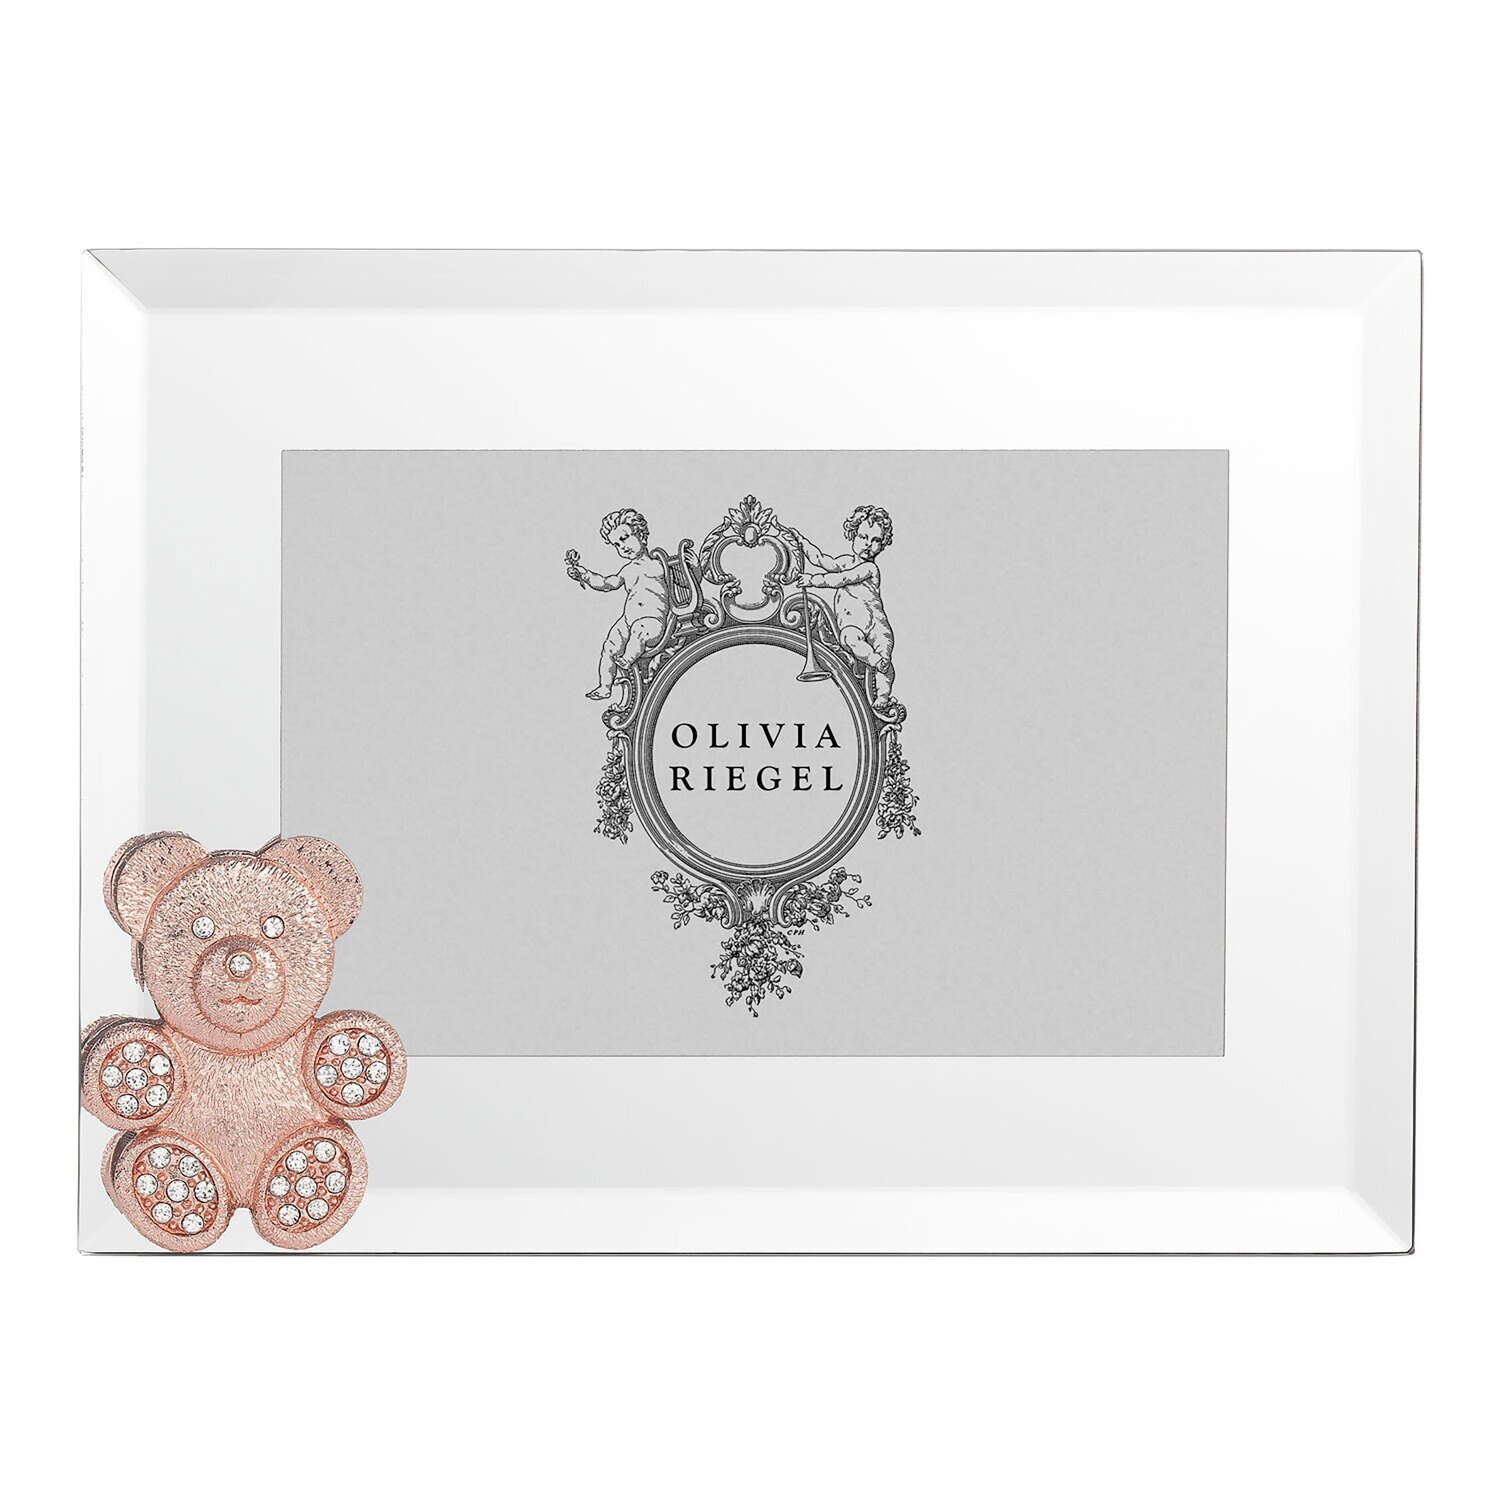 Olivia Riegel Rose Gold Teddy Bear 4 x 6 Inch Picture Frame RT4883